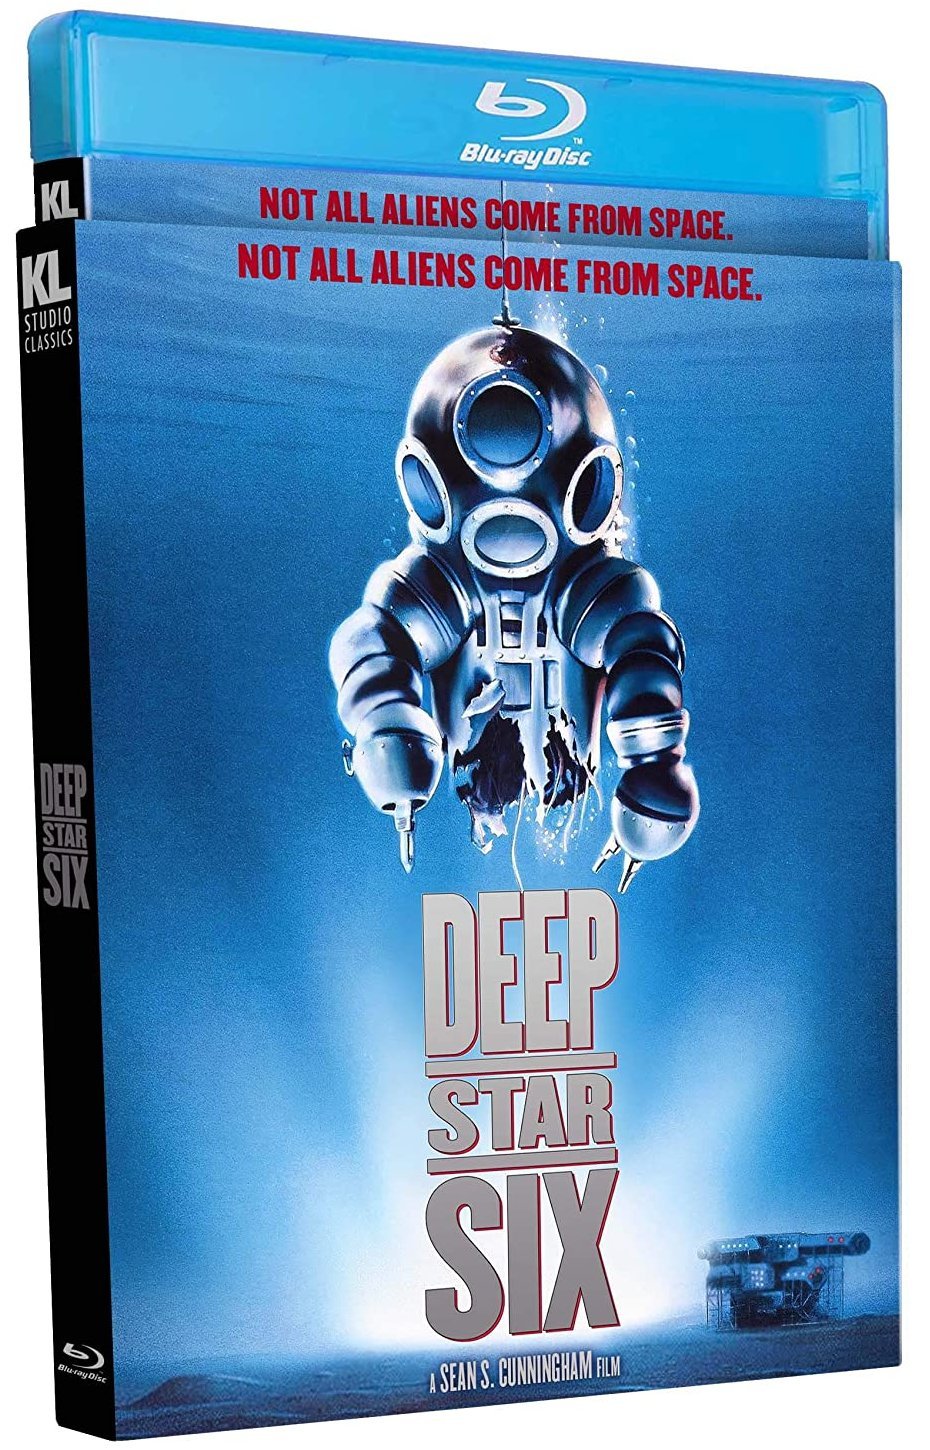 SPACE WARS: THE QUEST FOR DEEPSTAR' Fans Of 80s Trash Sci Fi